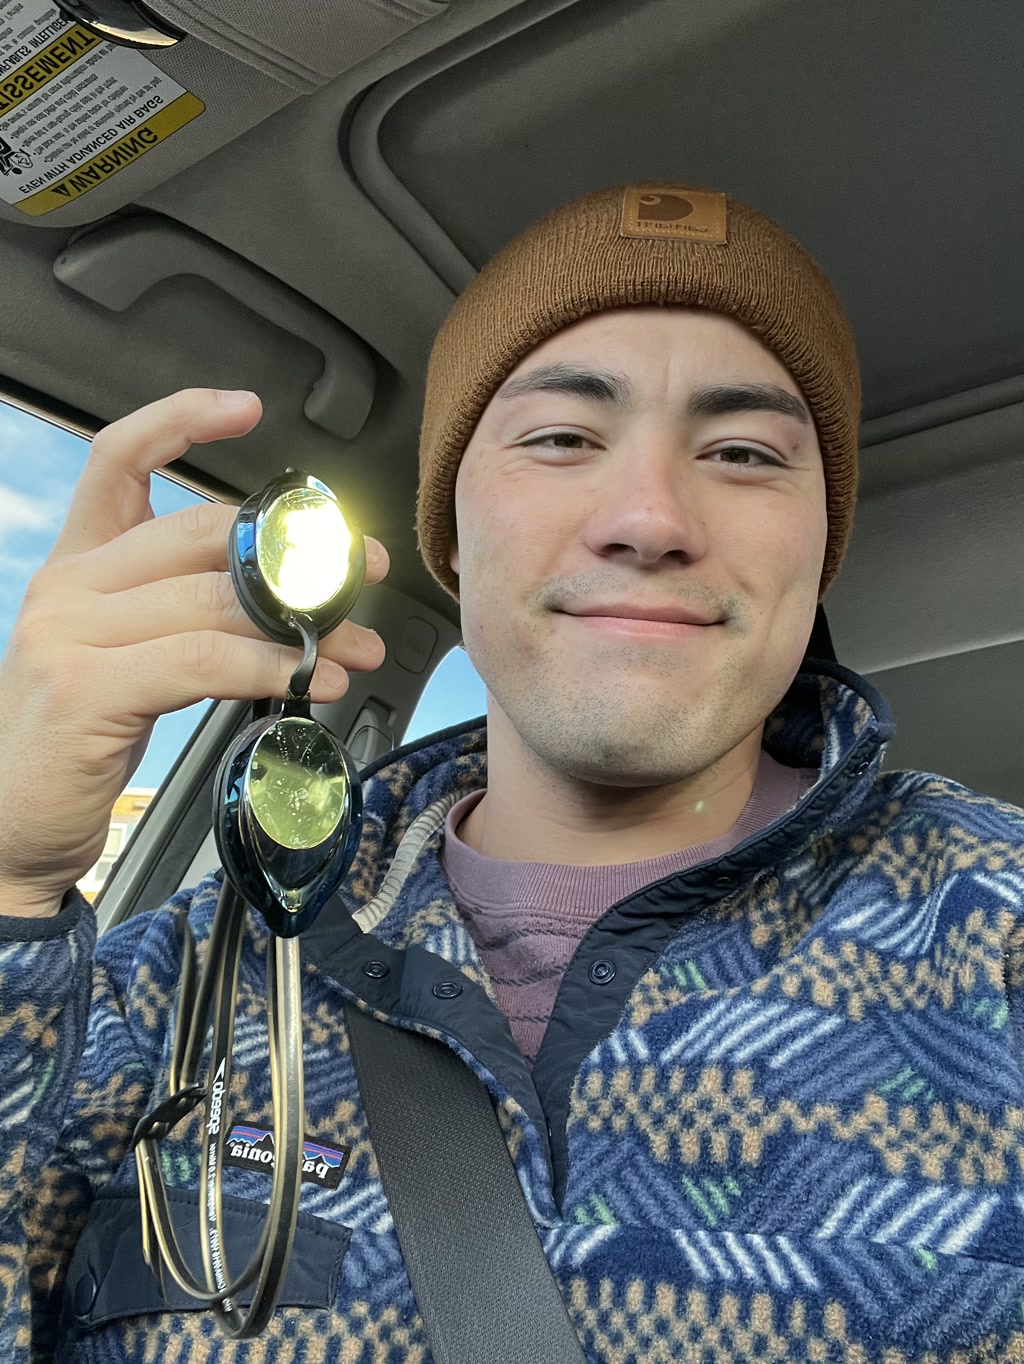 A person is sitting in the driver’s seat of a car, holding a stethoscope up in front of them with the diaphragm aimed towards the camera, causing it to reflect light. The person is wearing a brown beanie with a logo patch at the fold and a blue and white plaid fleece jacket over a maroon t-shirt. They appear to be smiling and wearing a seat belt. A sun visor with warning labels is visible in the background.